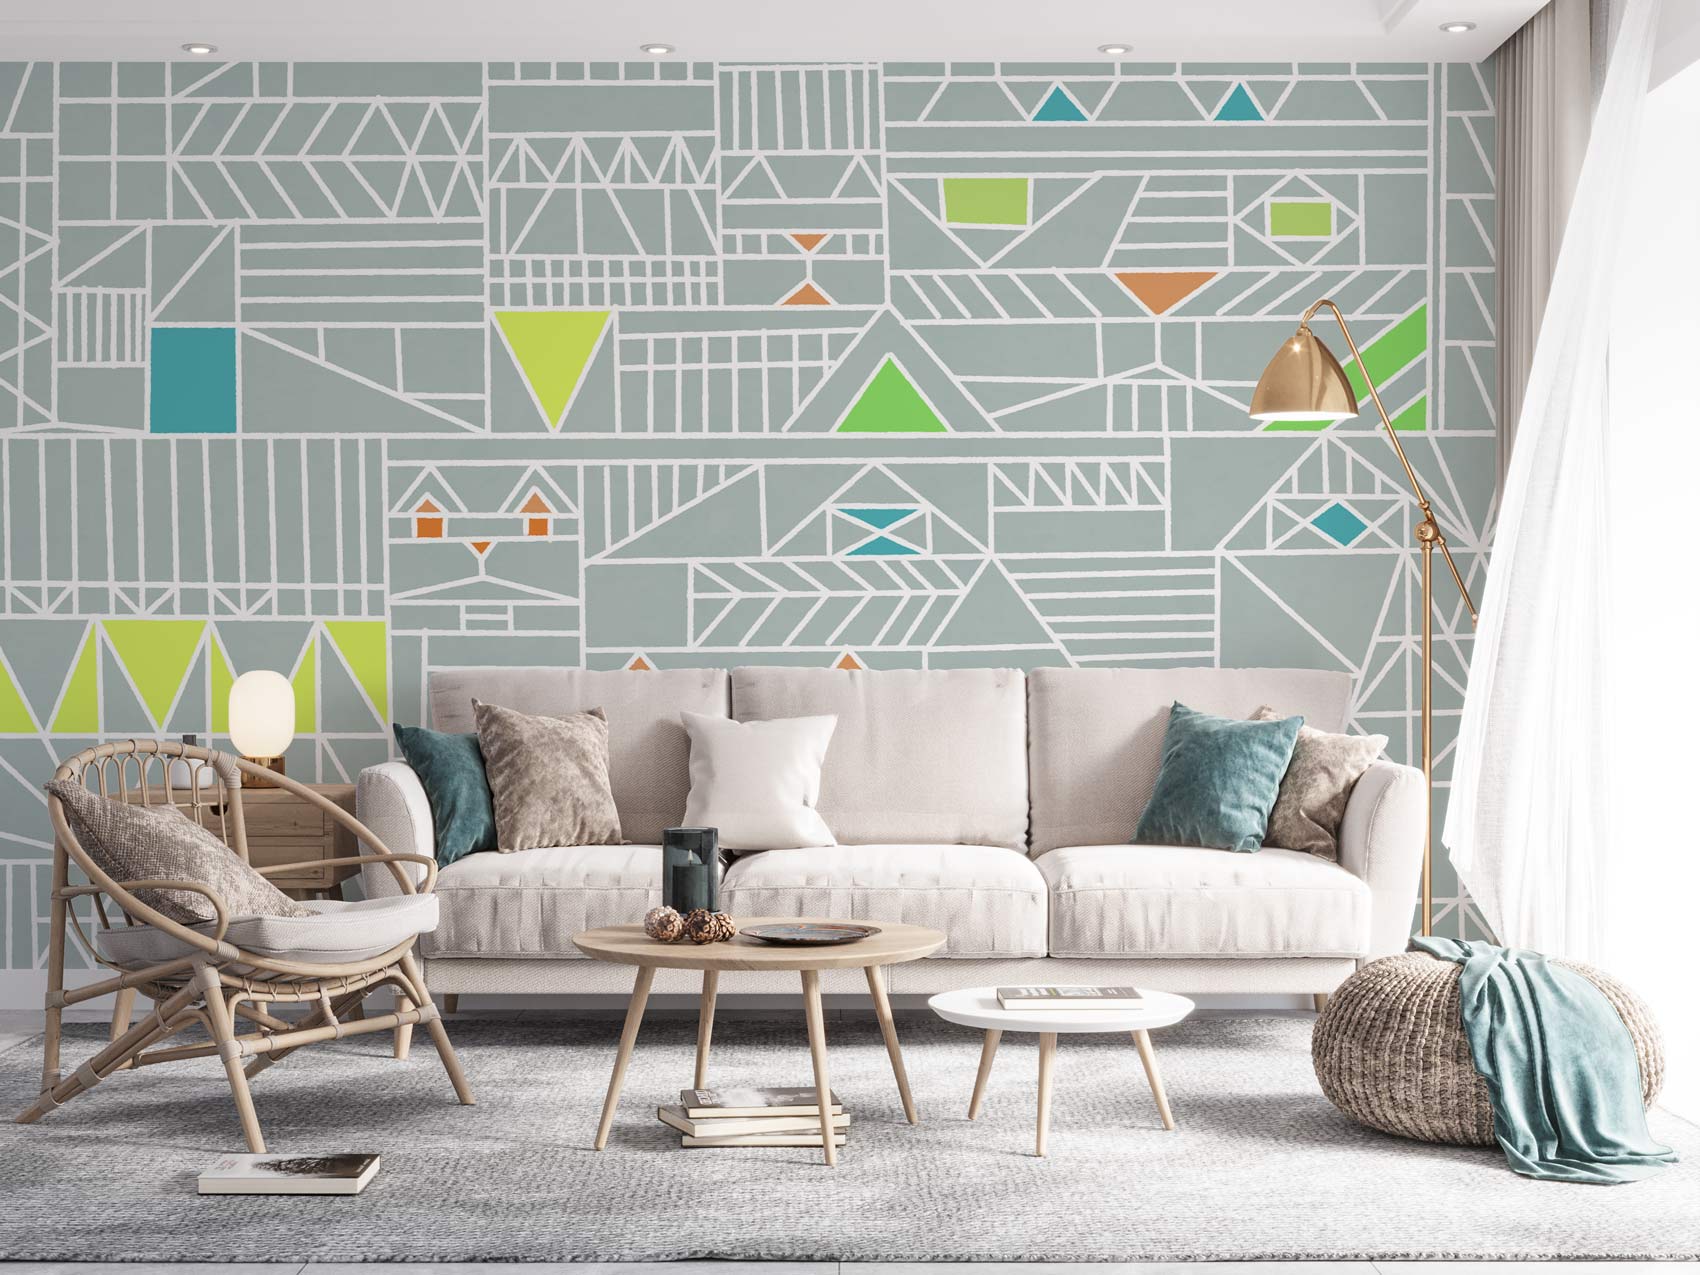 Wallpaper mural with a geometric pattern for the living room, intended for use in decorating the living room